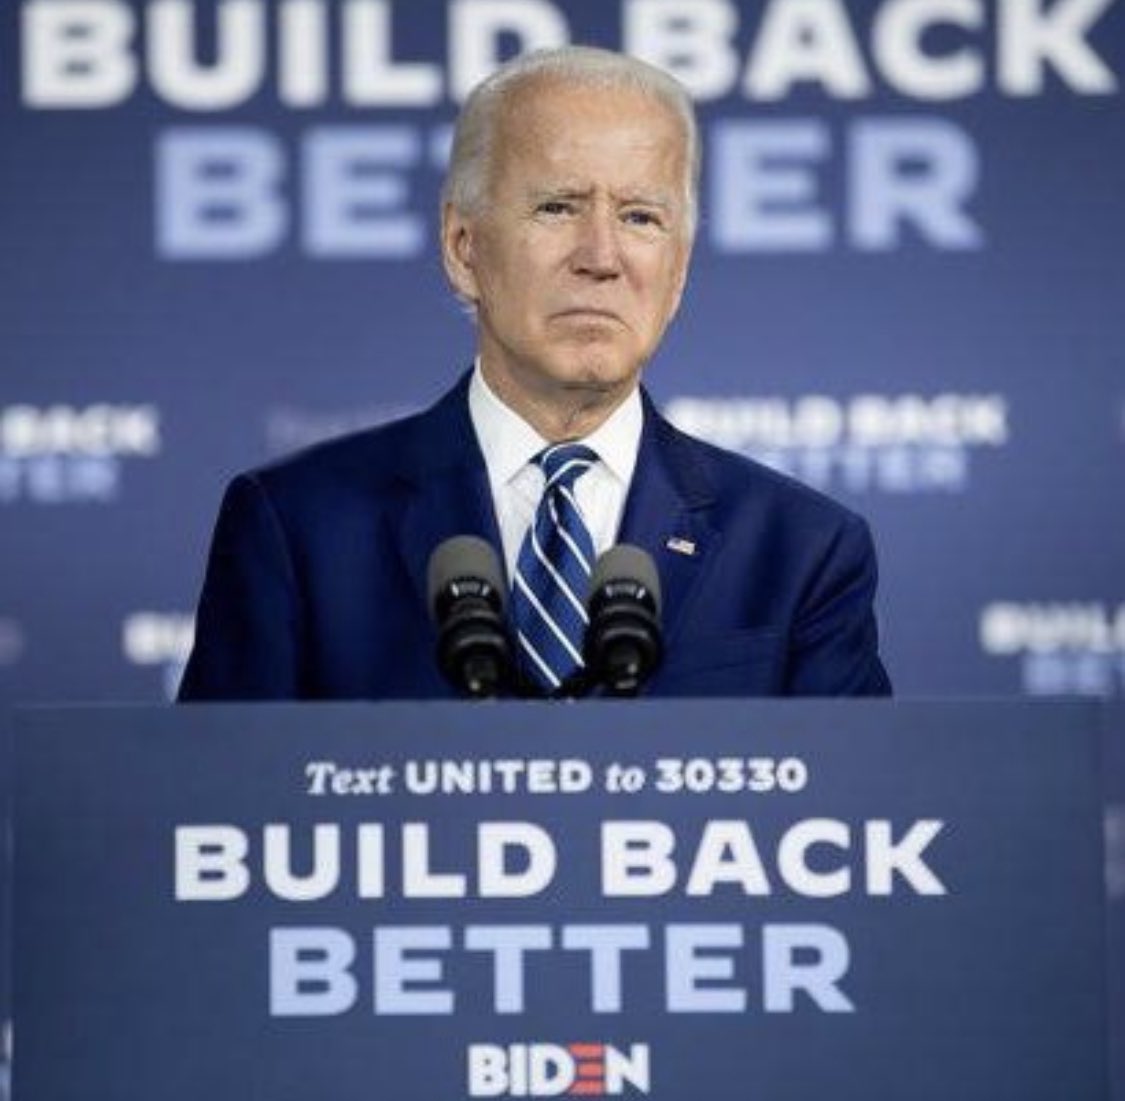 Small business that's not in the Biden coalition gets liquidated, his clients get goodies, workers and the world are just a resource that they burn. "It all comes back to solidarity".